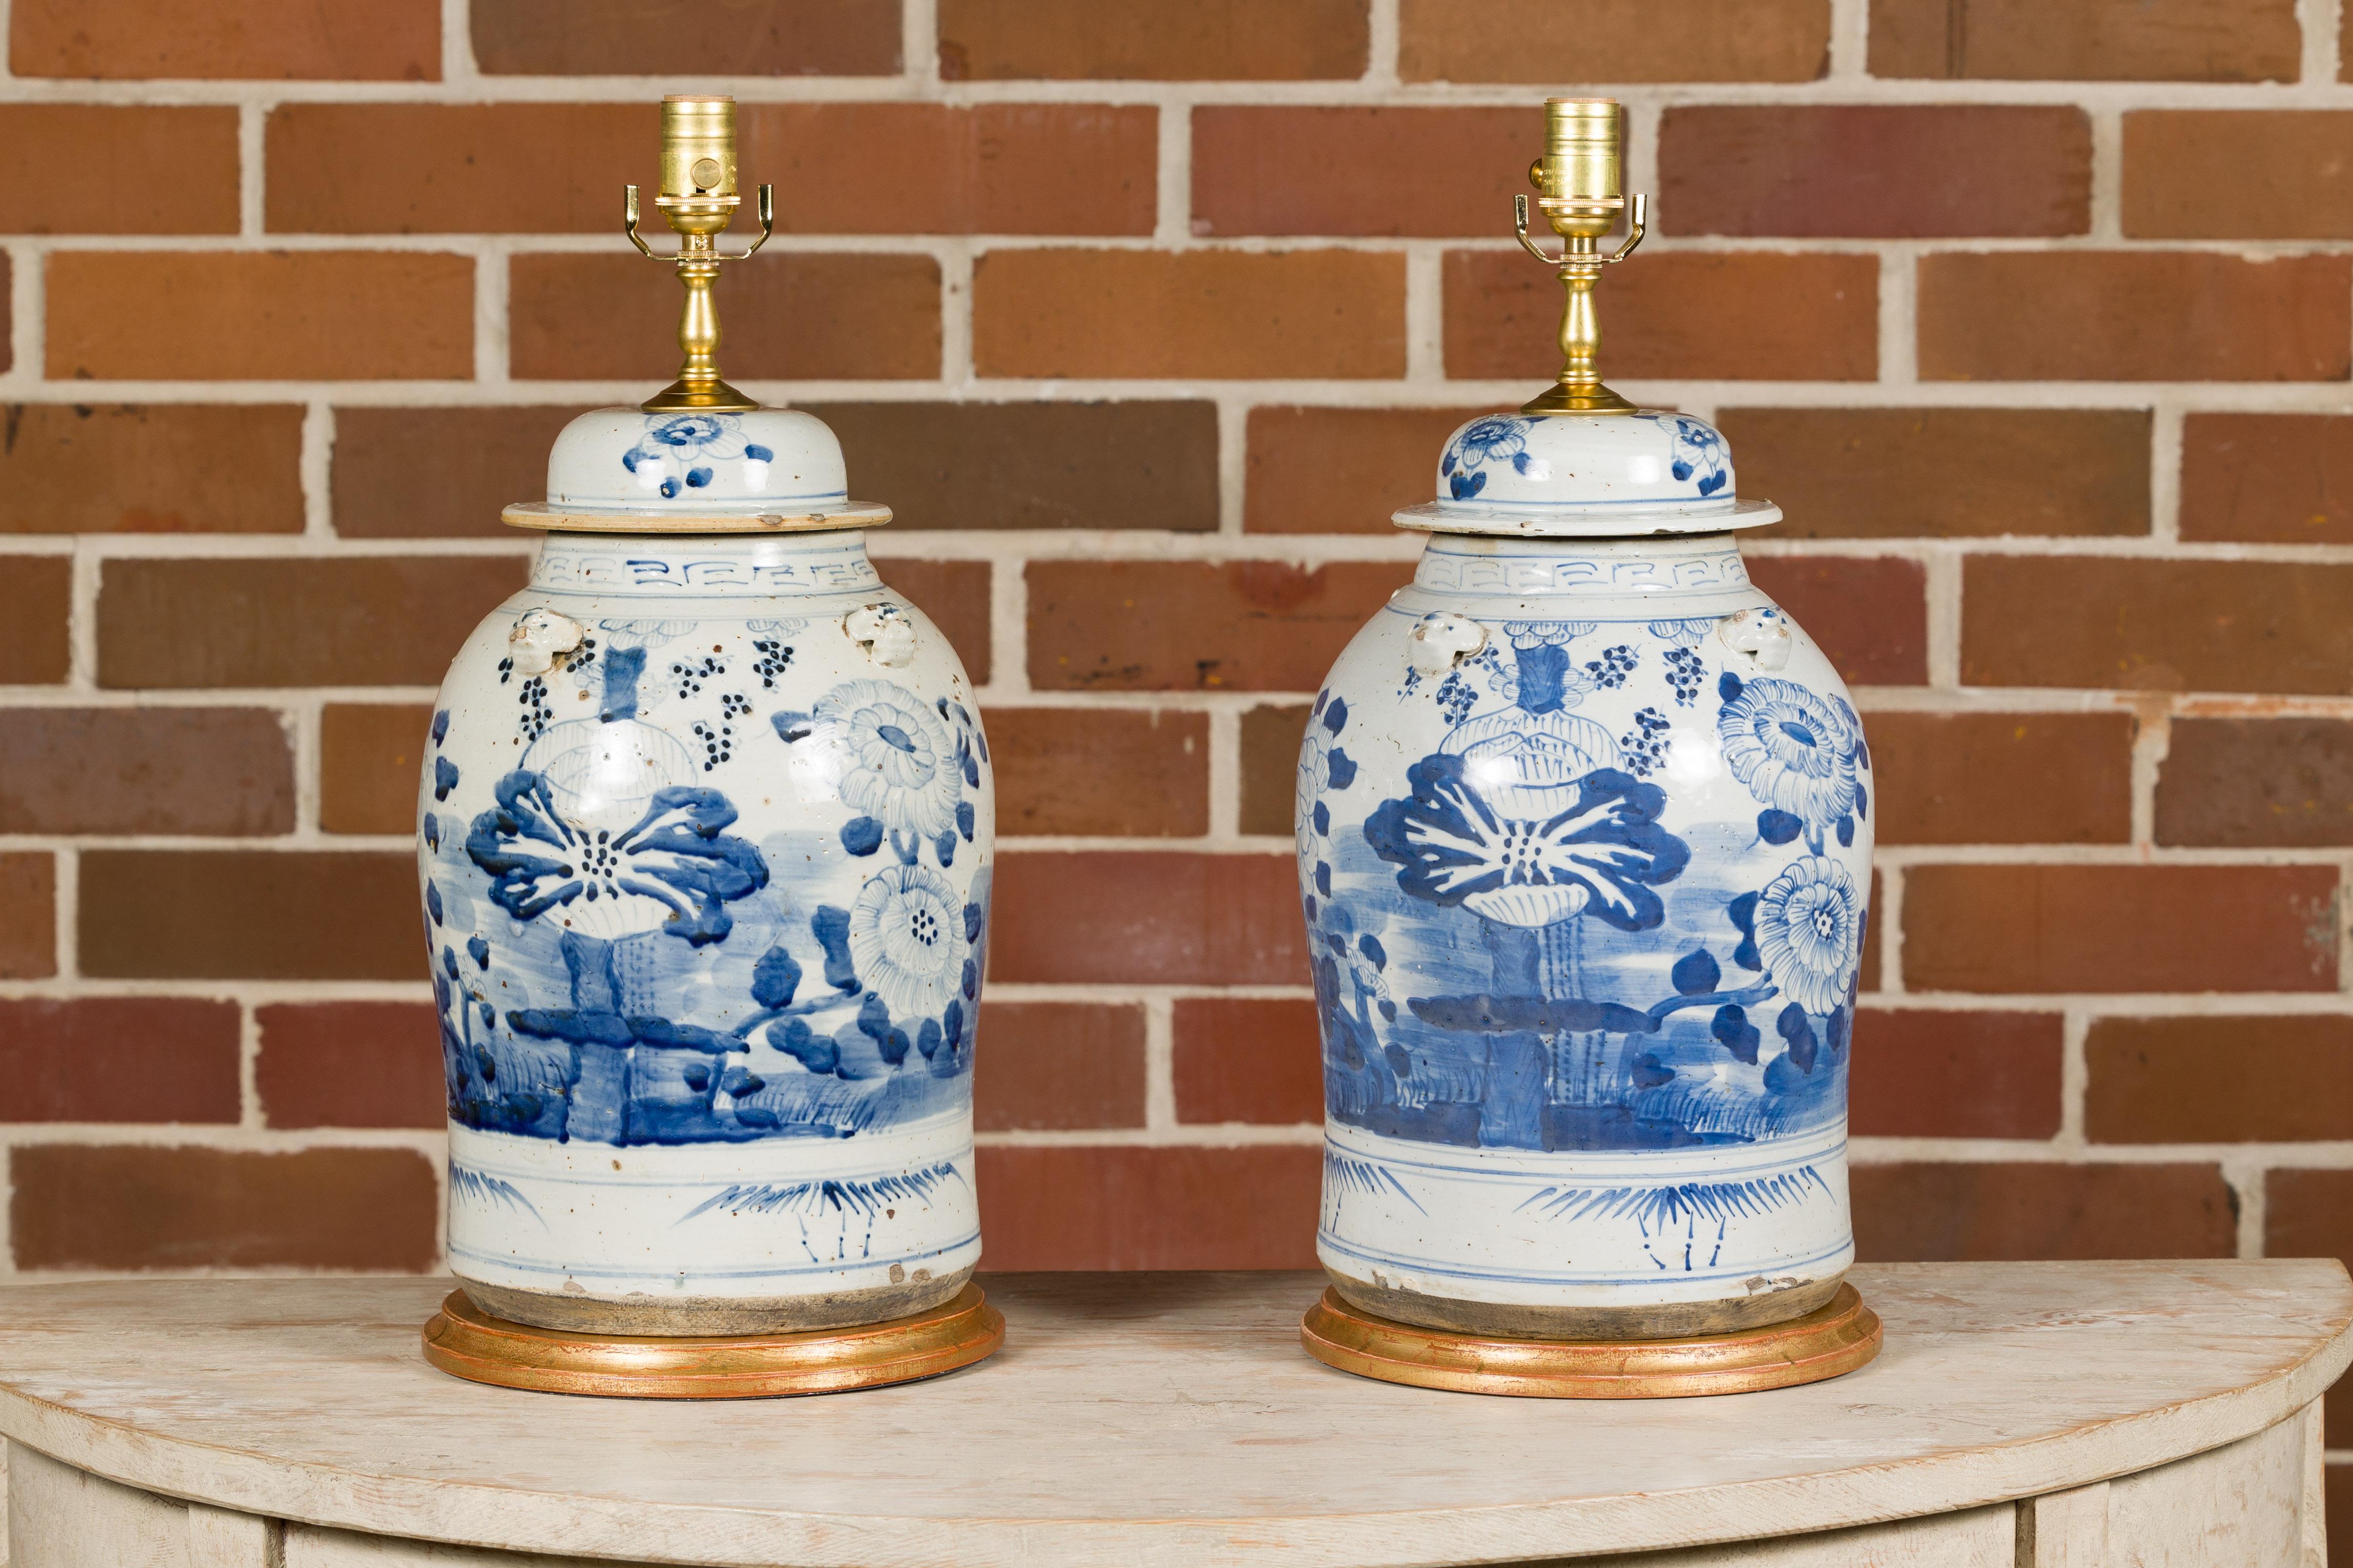 A pair of Asian porcelain jars with blue and white floral décor, newly mounted as table lamps on circular gilded bases. Embrace the captivating beauty of Eastern artistry with this exquisite pair of Asian porcelain jars, transformed into table lamps